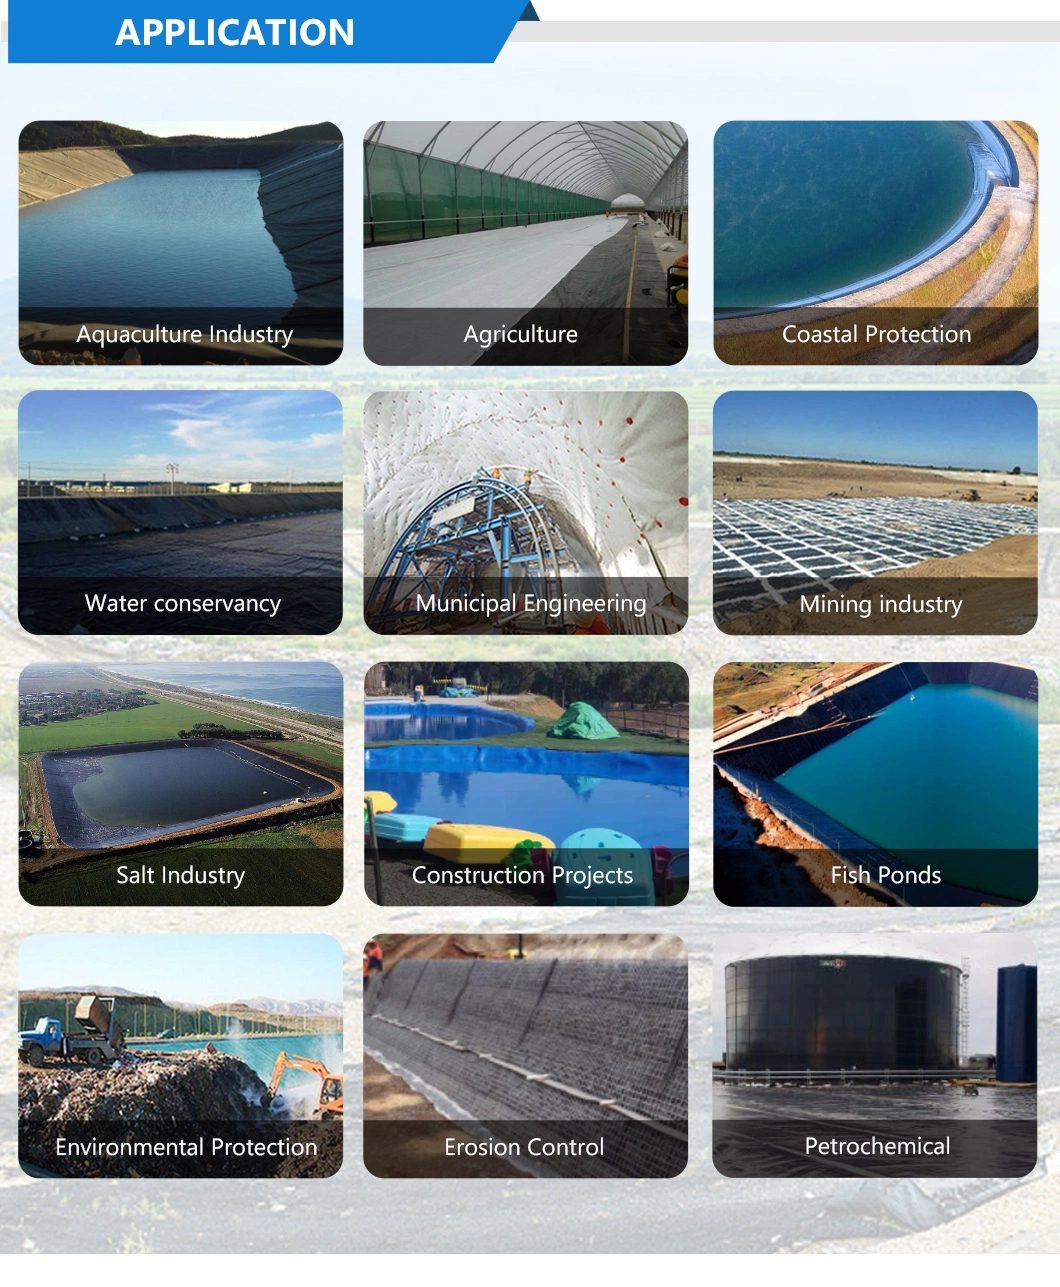 200g-0.4mm-200g Composite Geomembrane with Two Layers Geotextile One Layer Geomembrane for Fish Ponds/Shrimp Ponds/Artificial Lakes/Reservoirs